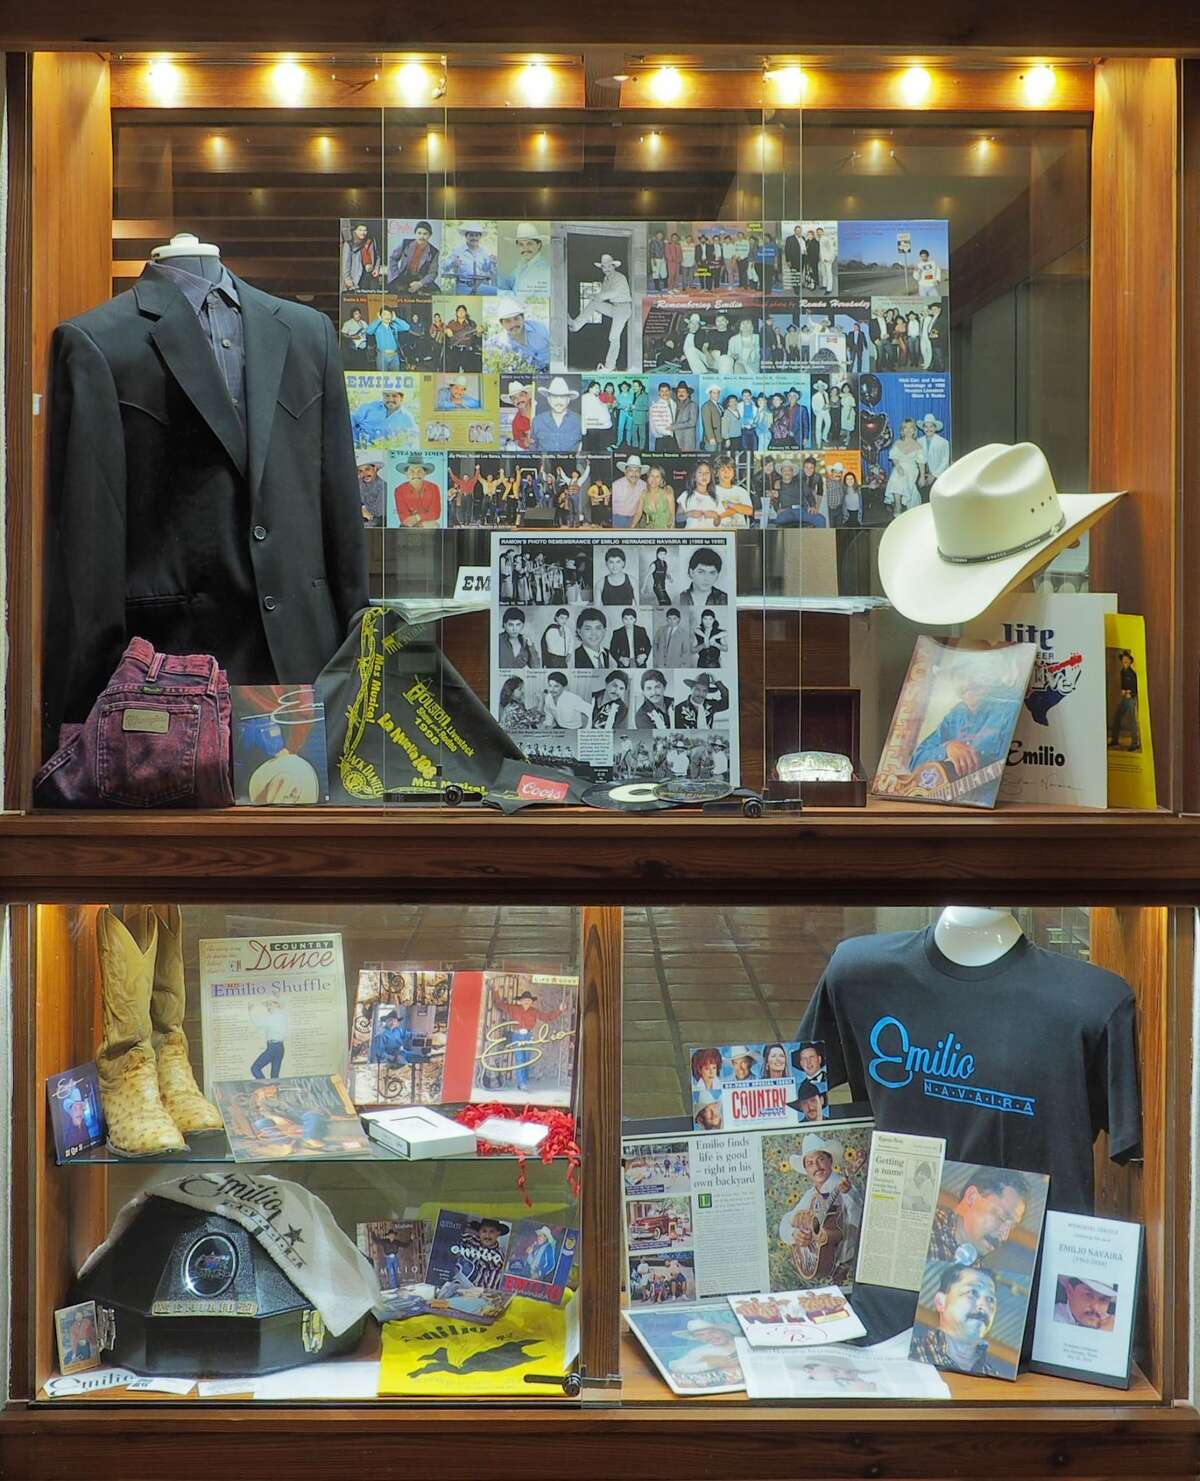 "Emilio Navaira: Tejano Music Icon," a display of the singer's mementos and memorabilia, is an addition to The Wittliff Collections housed inside the campus' Albert B. Alkek Library that opened on Sept. 1.